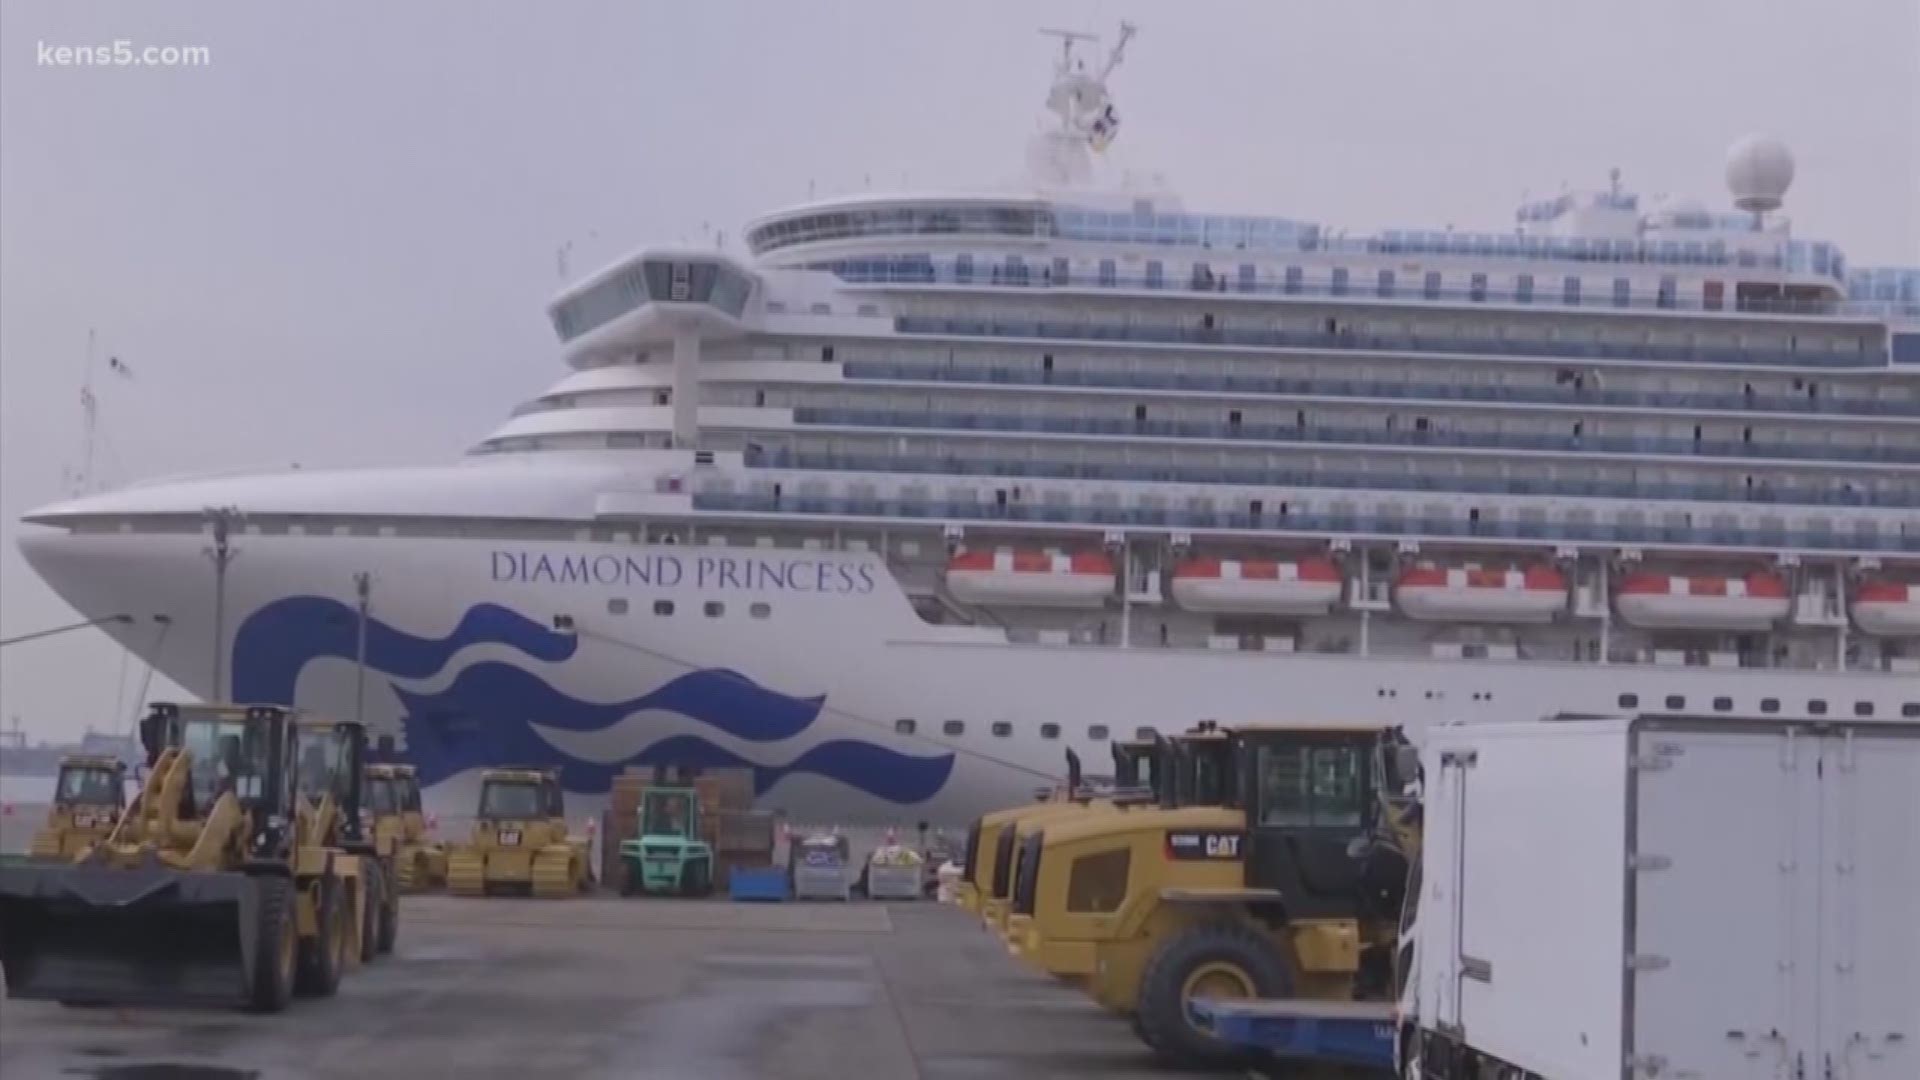 The ship, which is docked in Japan, has hundreds of American passengers.